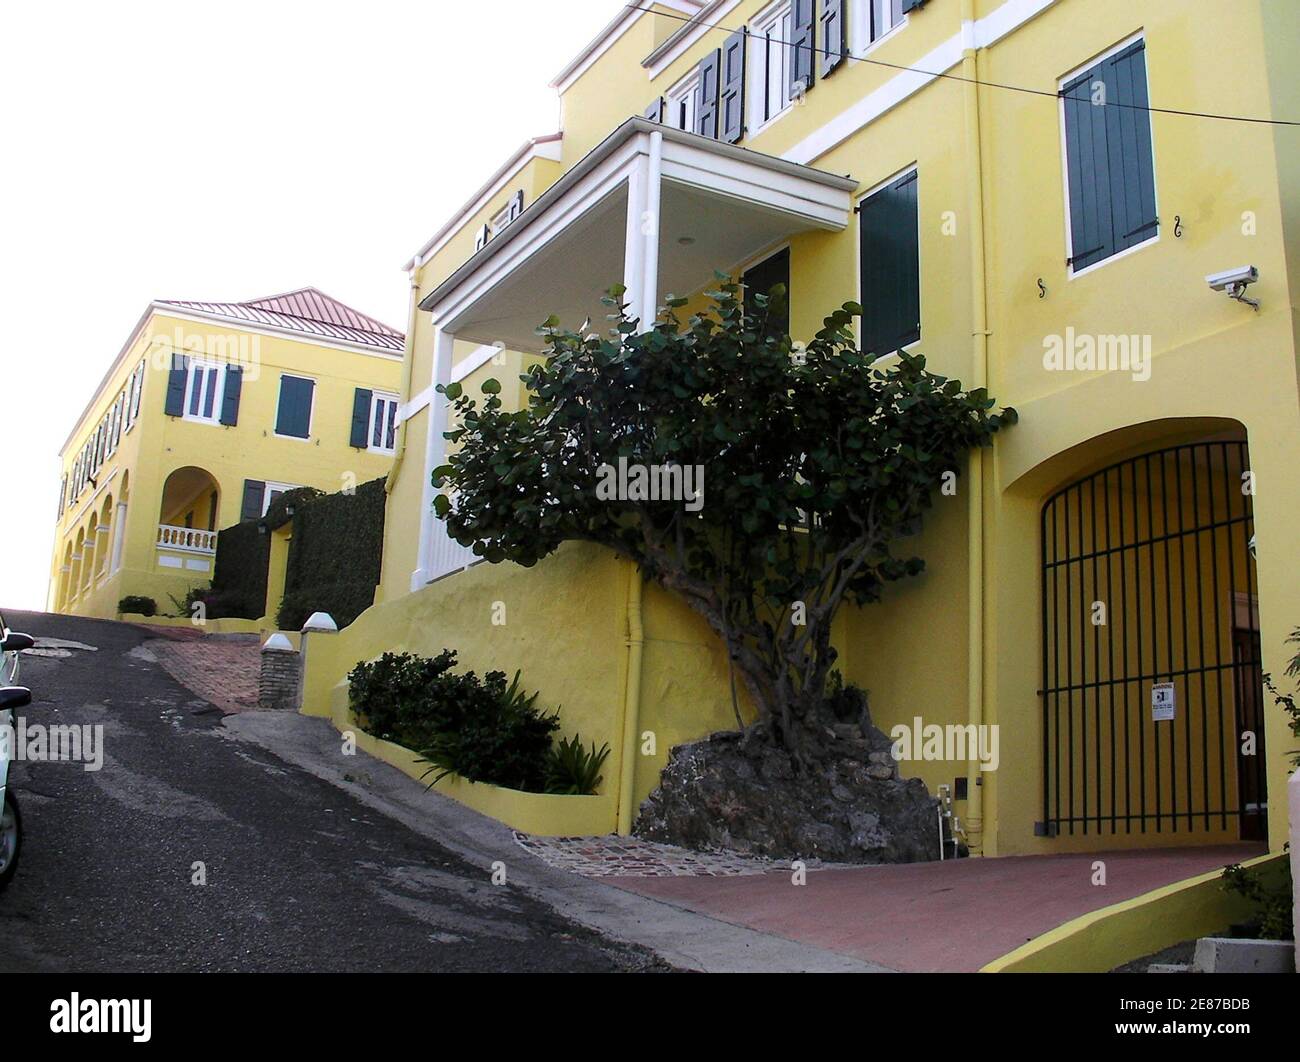 Allen Stanford's sprawling compound on Hill Street in Christiansted, which he purchased last year in a bankruptcy auction for $7.7 million, is pictured on February 24, 2009.  The St. Croix offices of Stanford have been shuttered by a U.S. court-appointed receiver overseeing the assets of the Texas billionaire, who is facing fraud charges, a member of the receiver's team said on Tuesday. REUTERS/Martinne Geller (UNITED STATES) Stock Photo